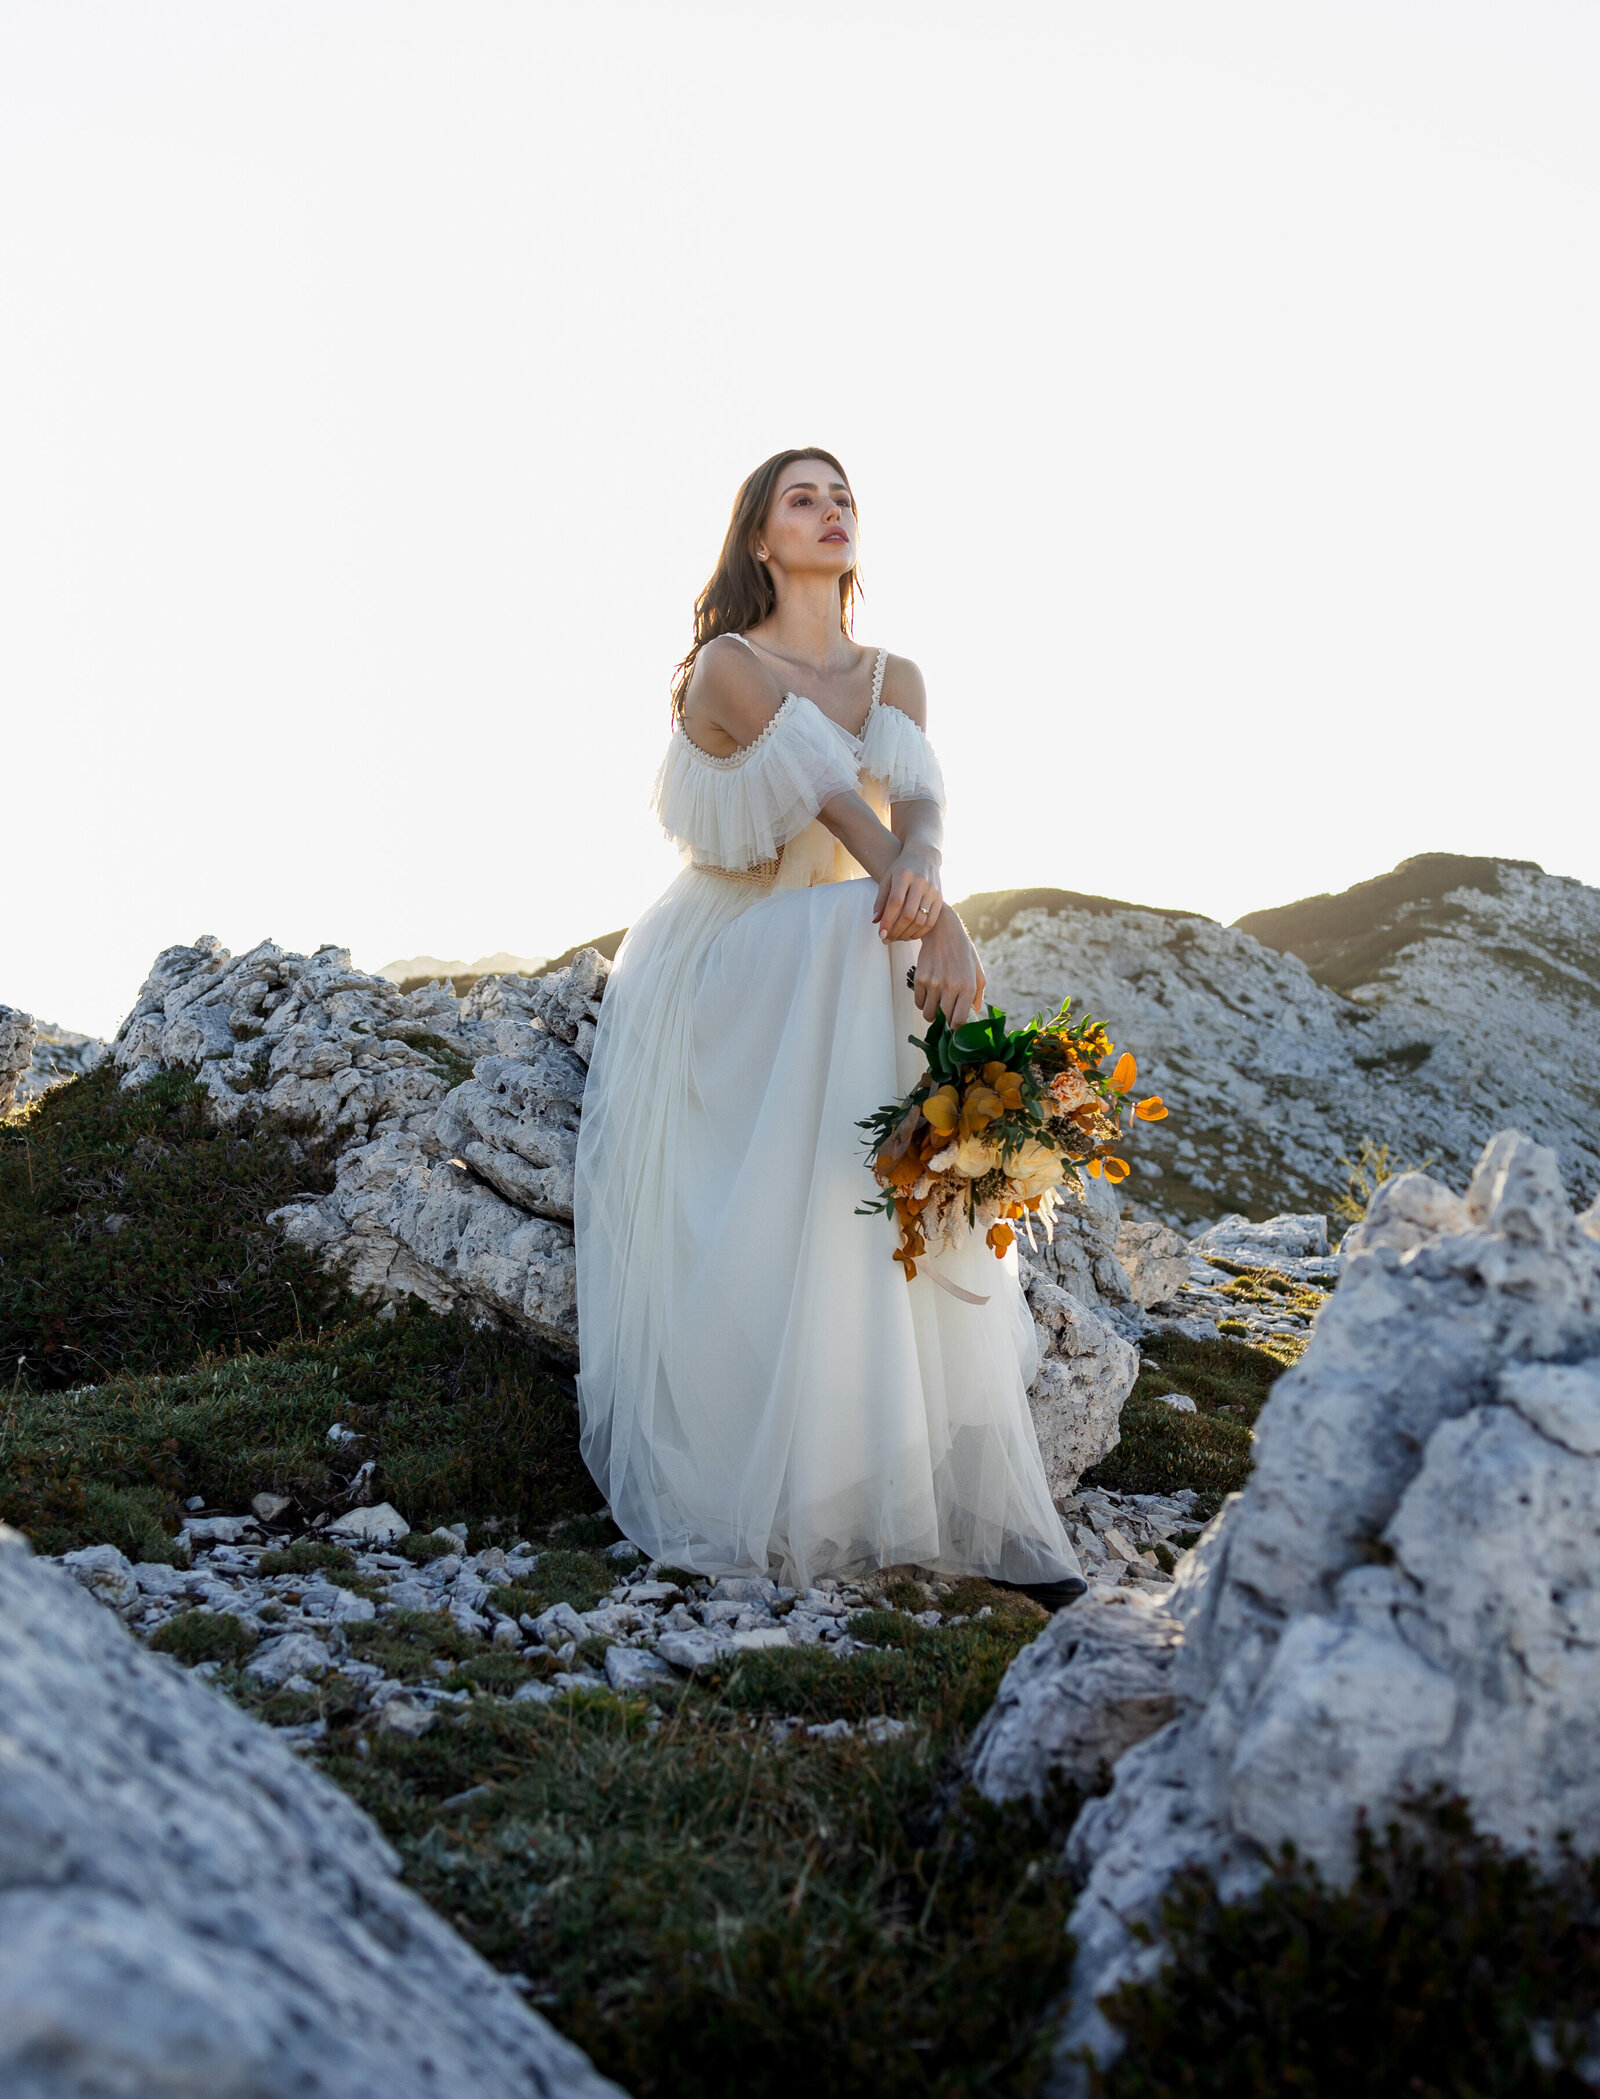 Elopement photos in the Dolomites, Italy. Photos taken by Kollar Photography, Italy Elopement Photographer